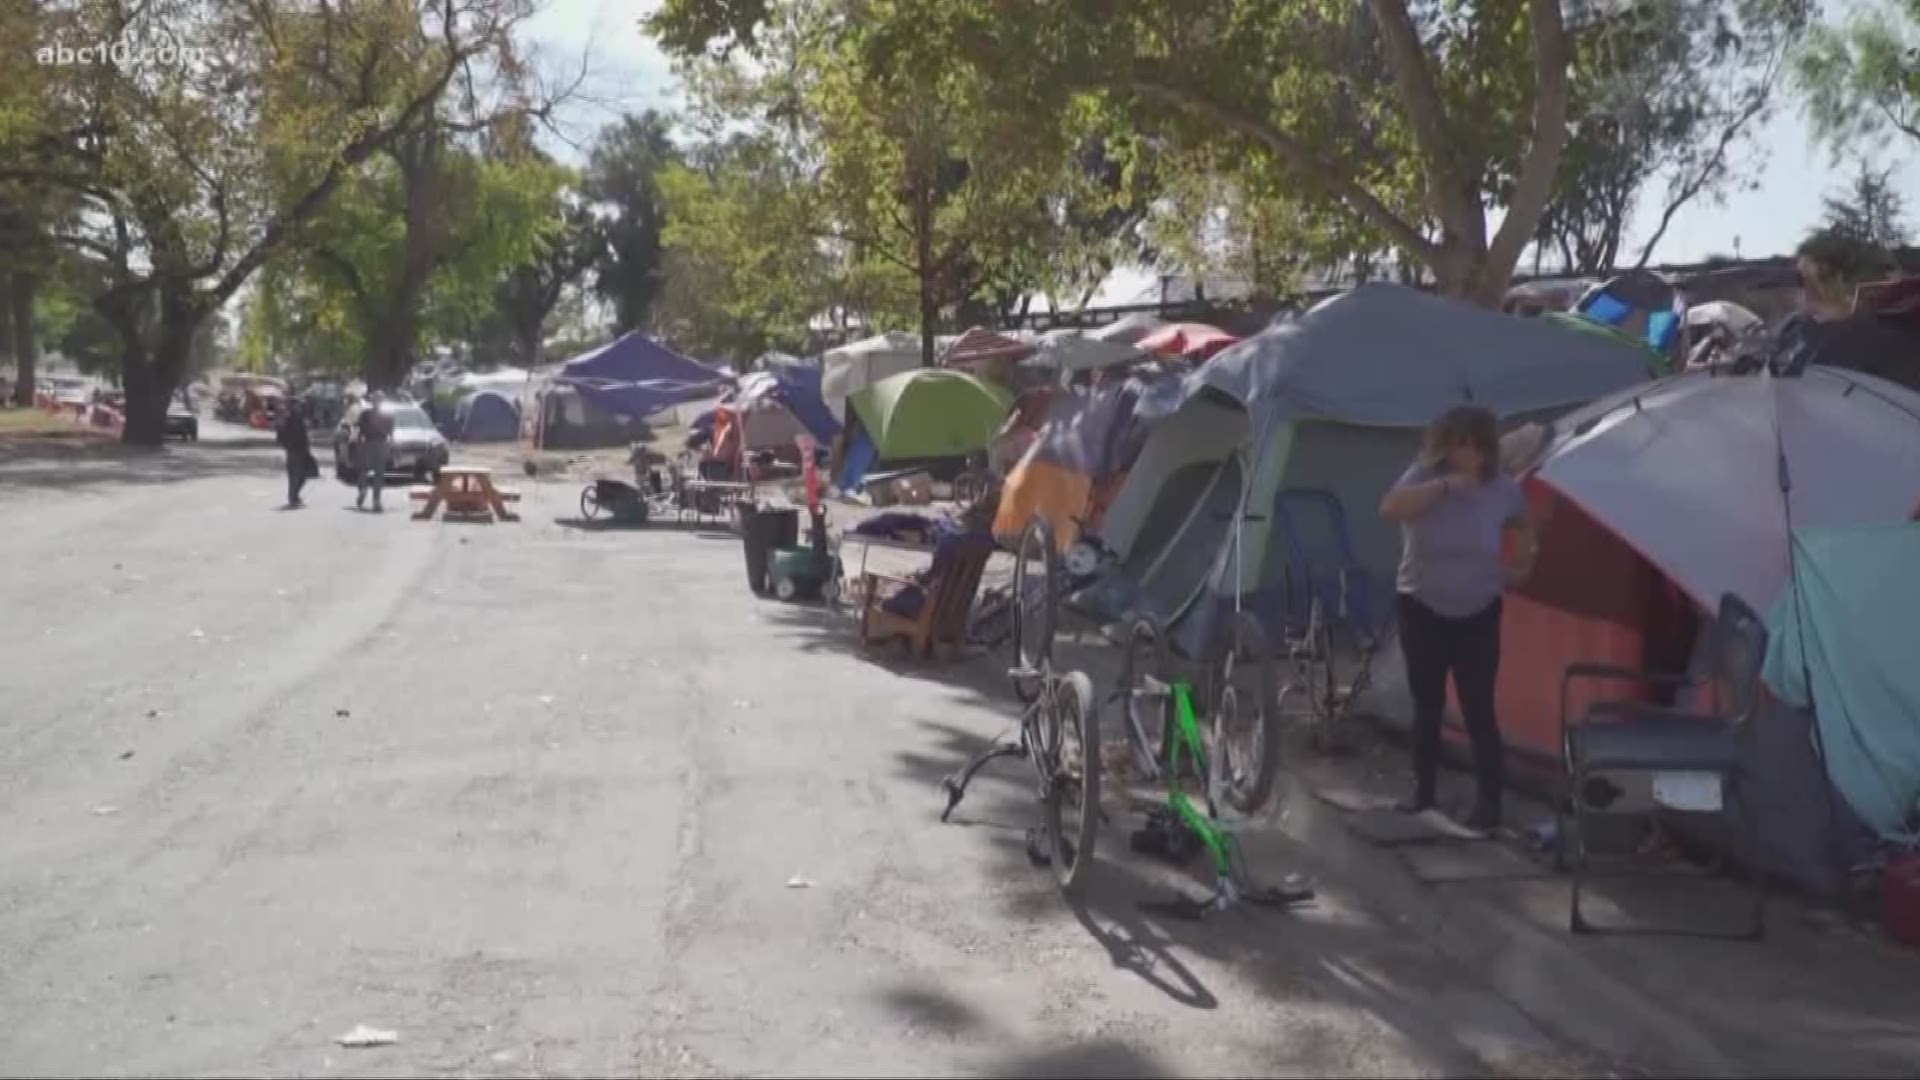 The City of Modesto designated a park for homeless people to stay, without any question or tickets, just about a month ago. Since then, the park has developed into its own "village," complete with their own so-called "council members" and "code of conduct